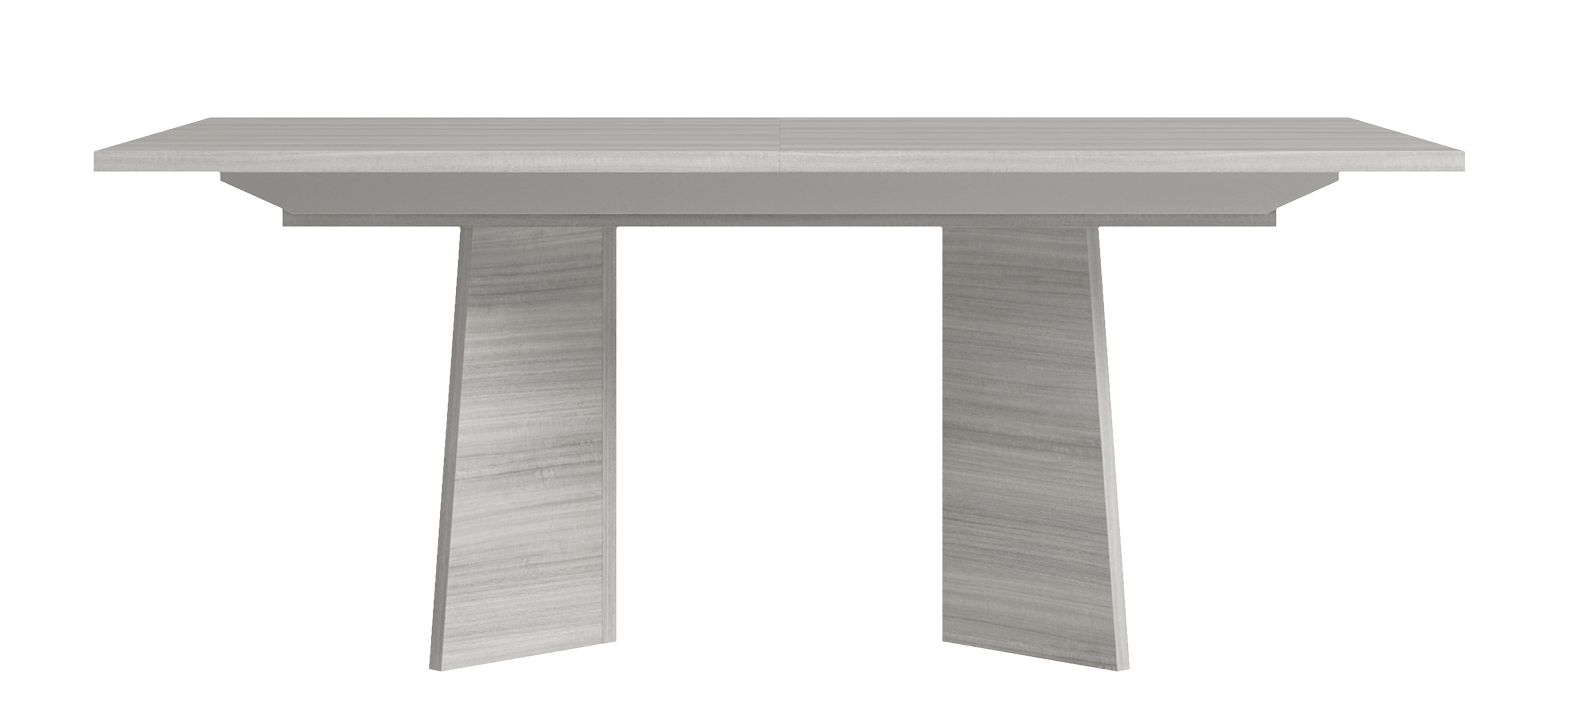 Brands Status Modern Collections, Italy Mia Dining Table